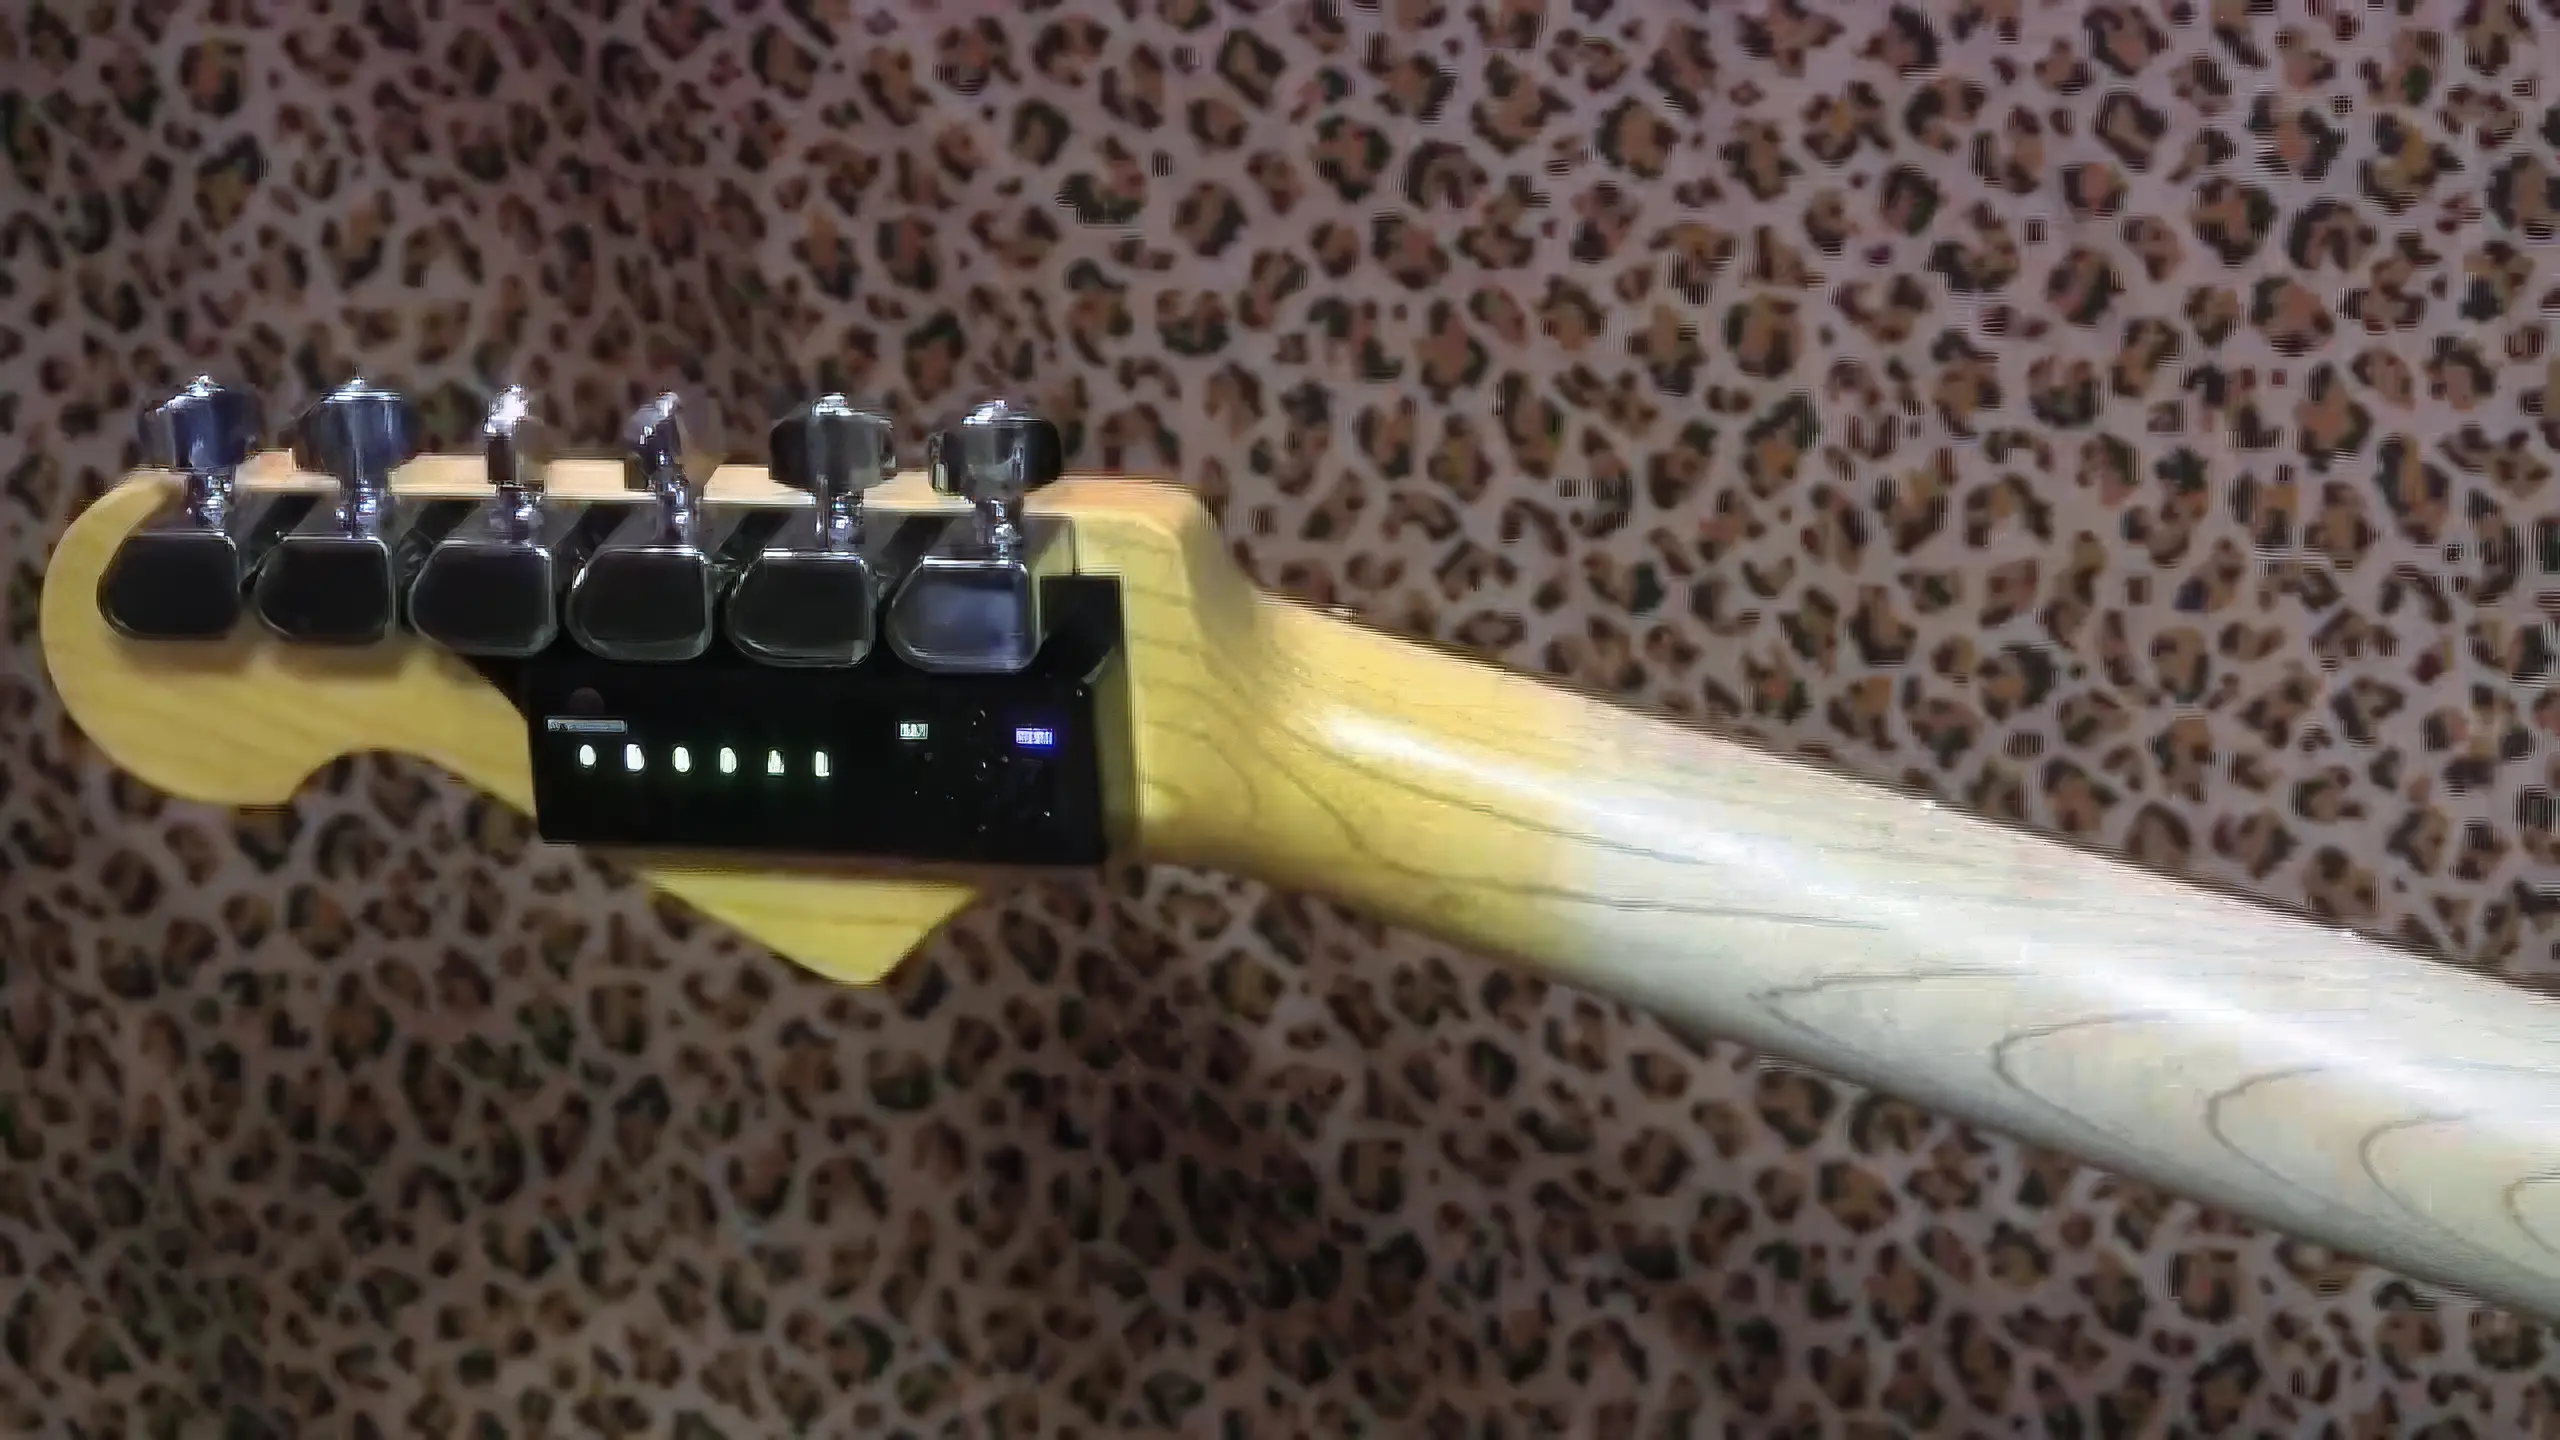 YouTube Automatic guitar tuner